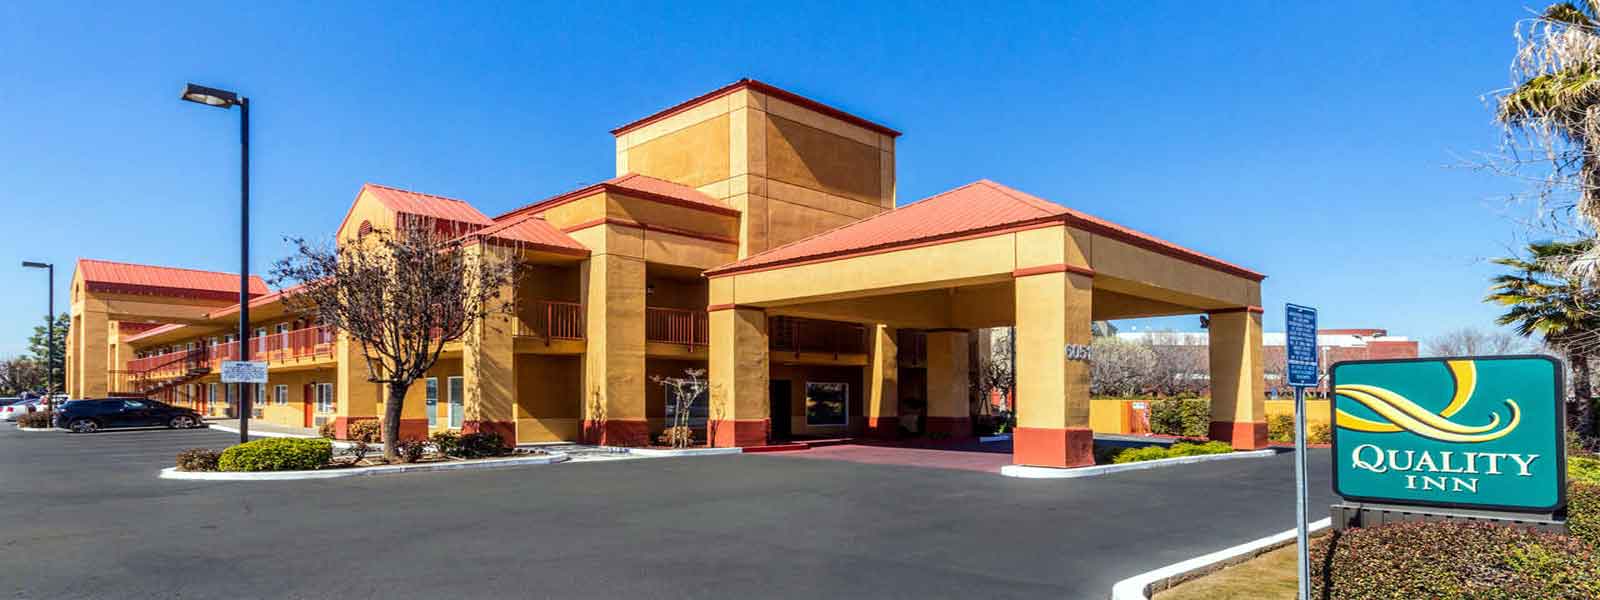 Clean Comfortable Rooms Lodging Hotels Motels in Fresno California